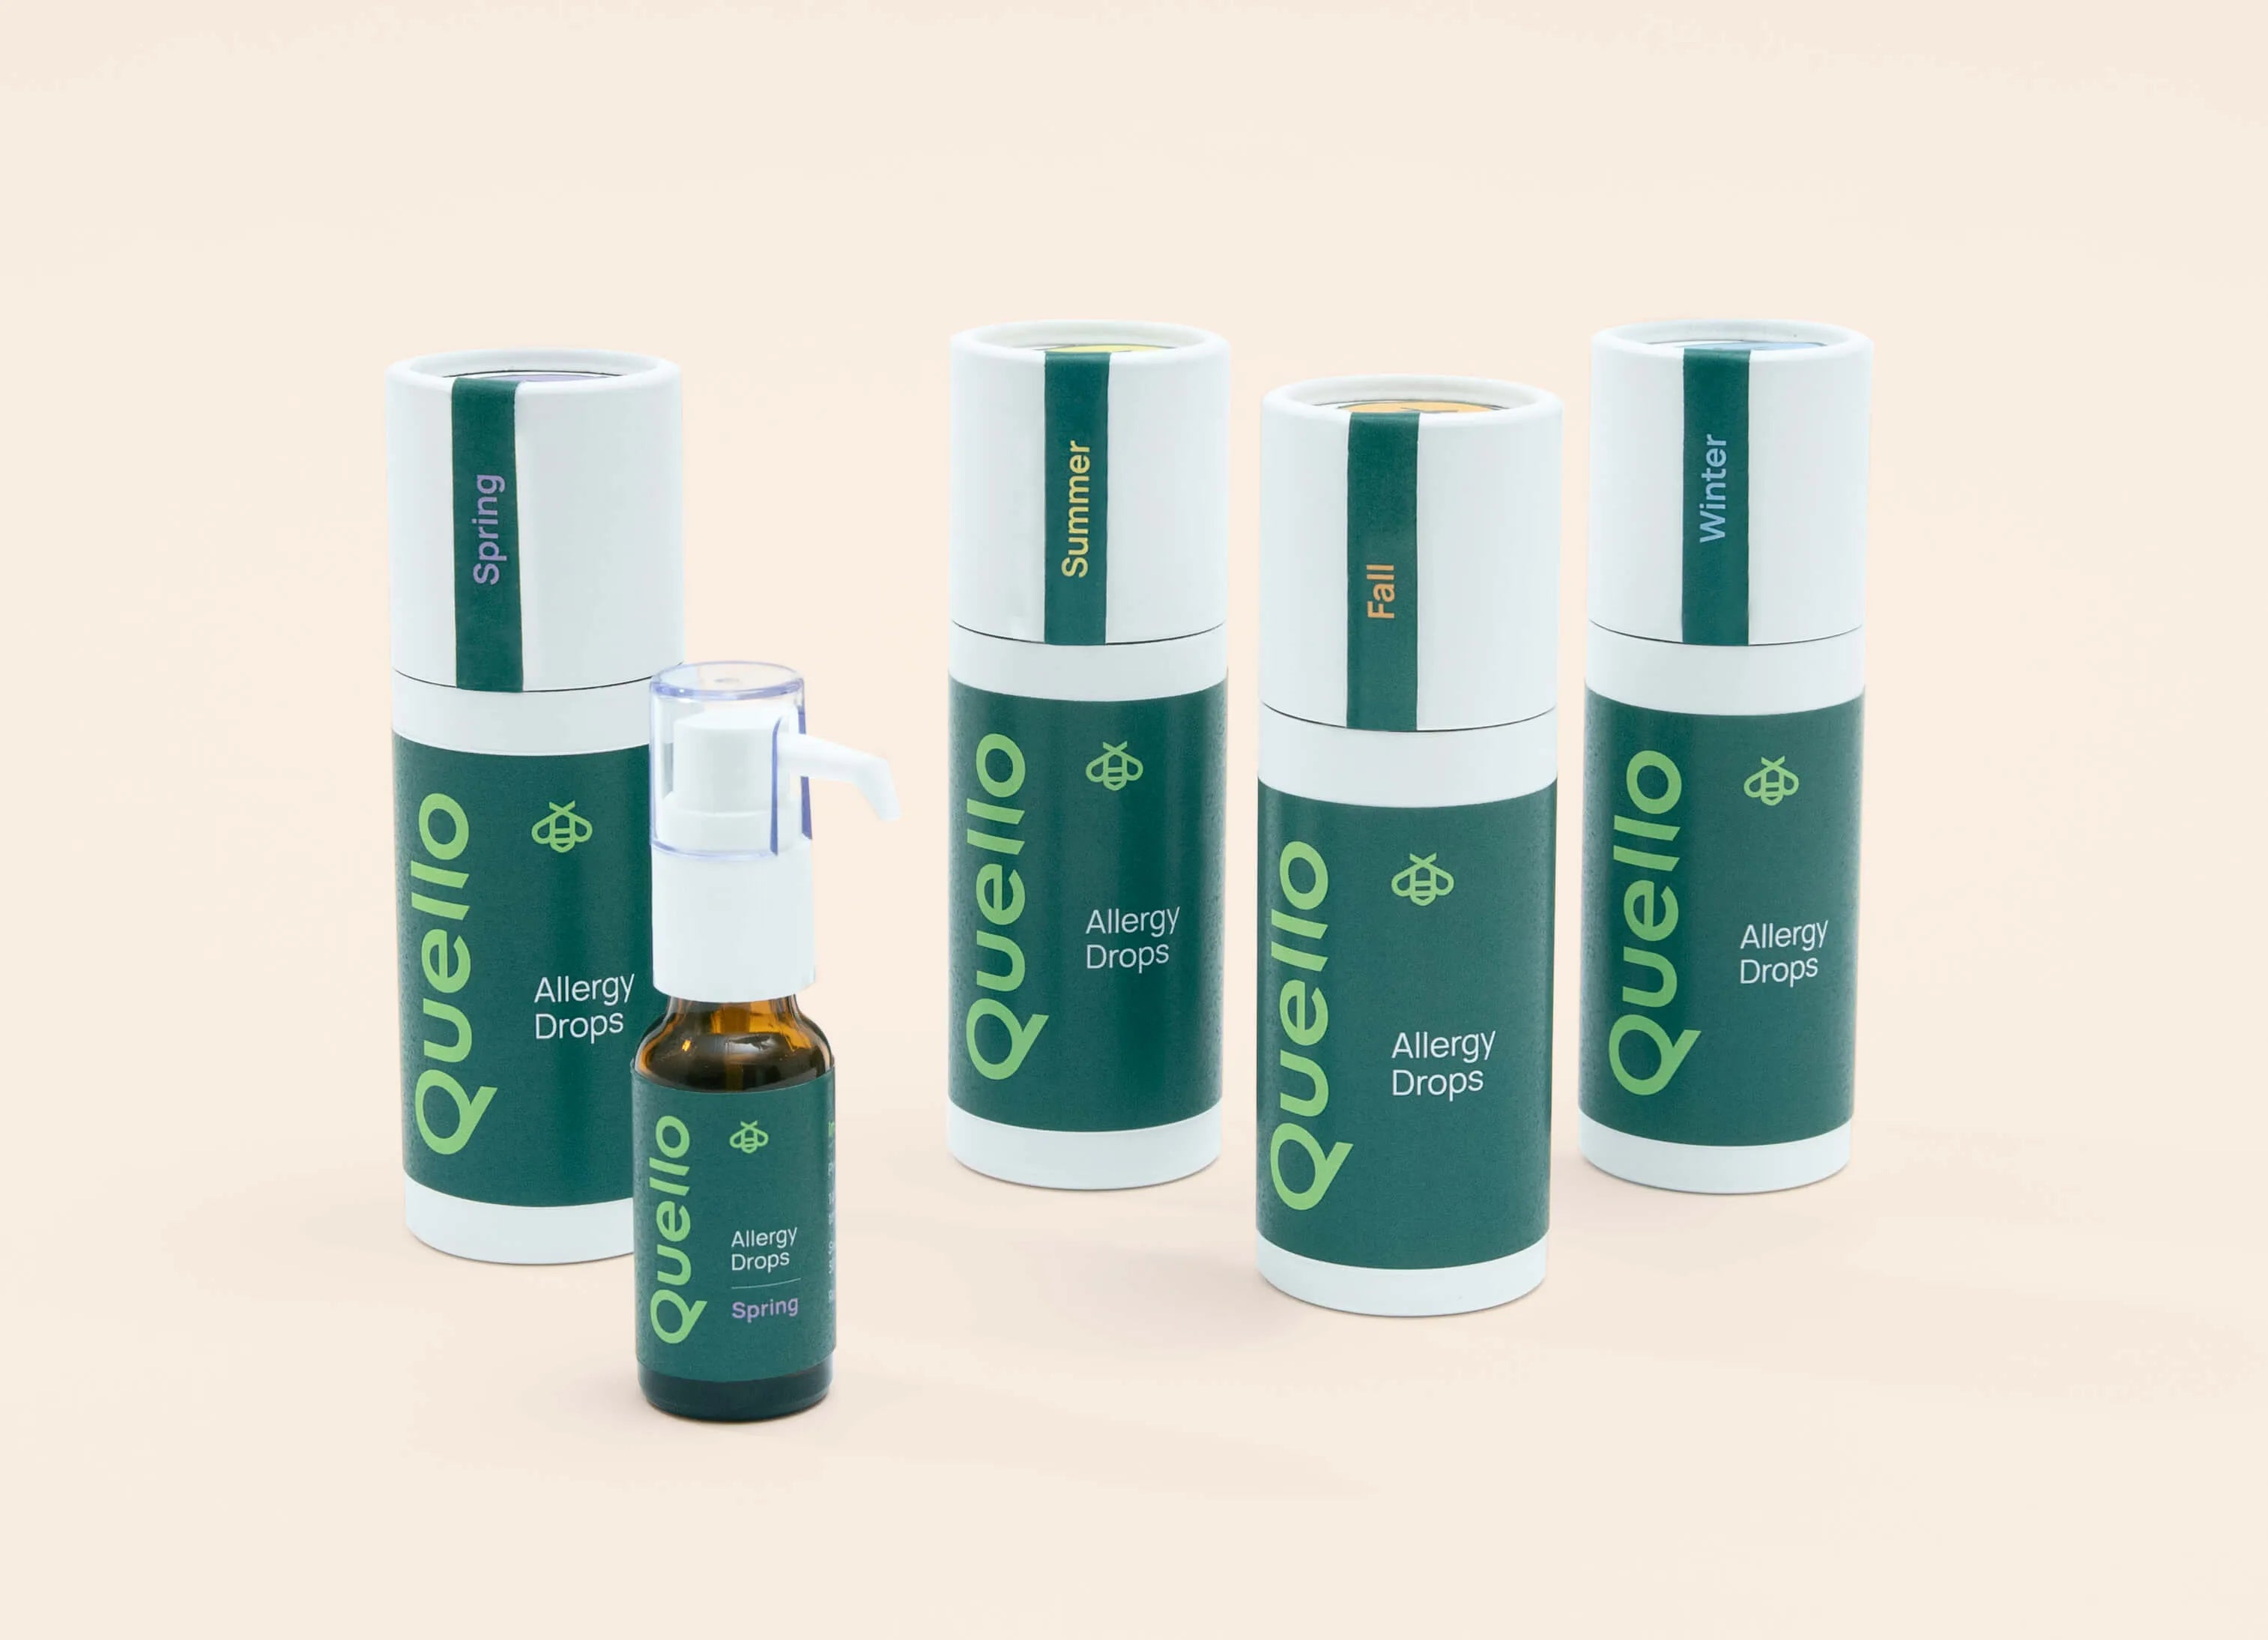 5 bottles of Quello allergy drops displaying the branding and packaging